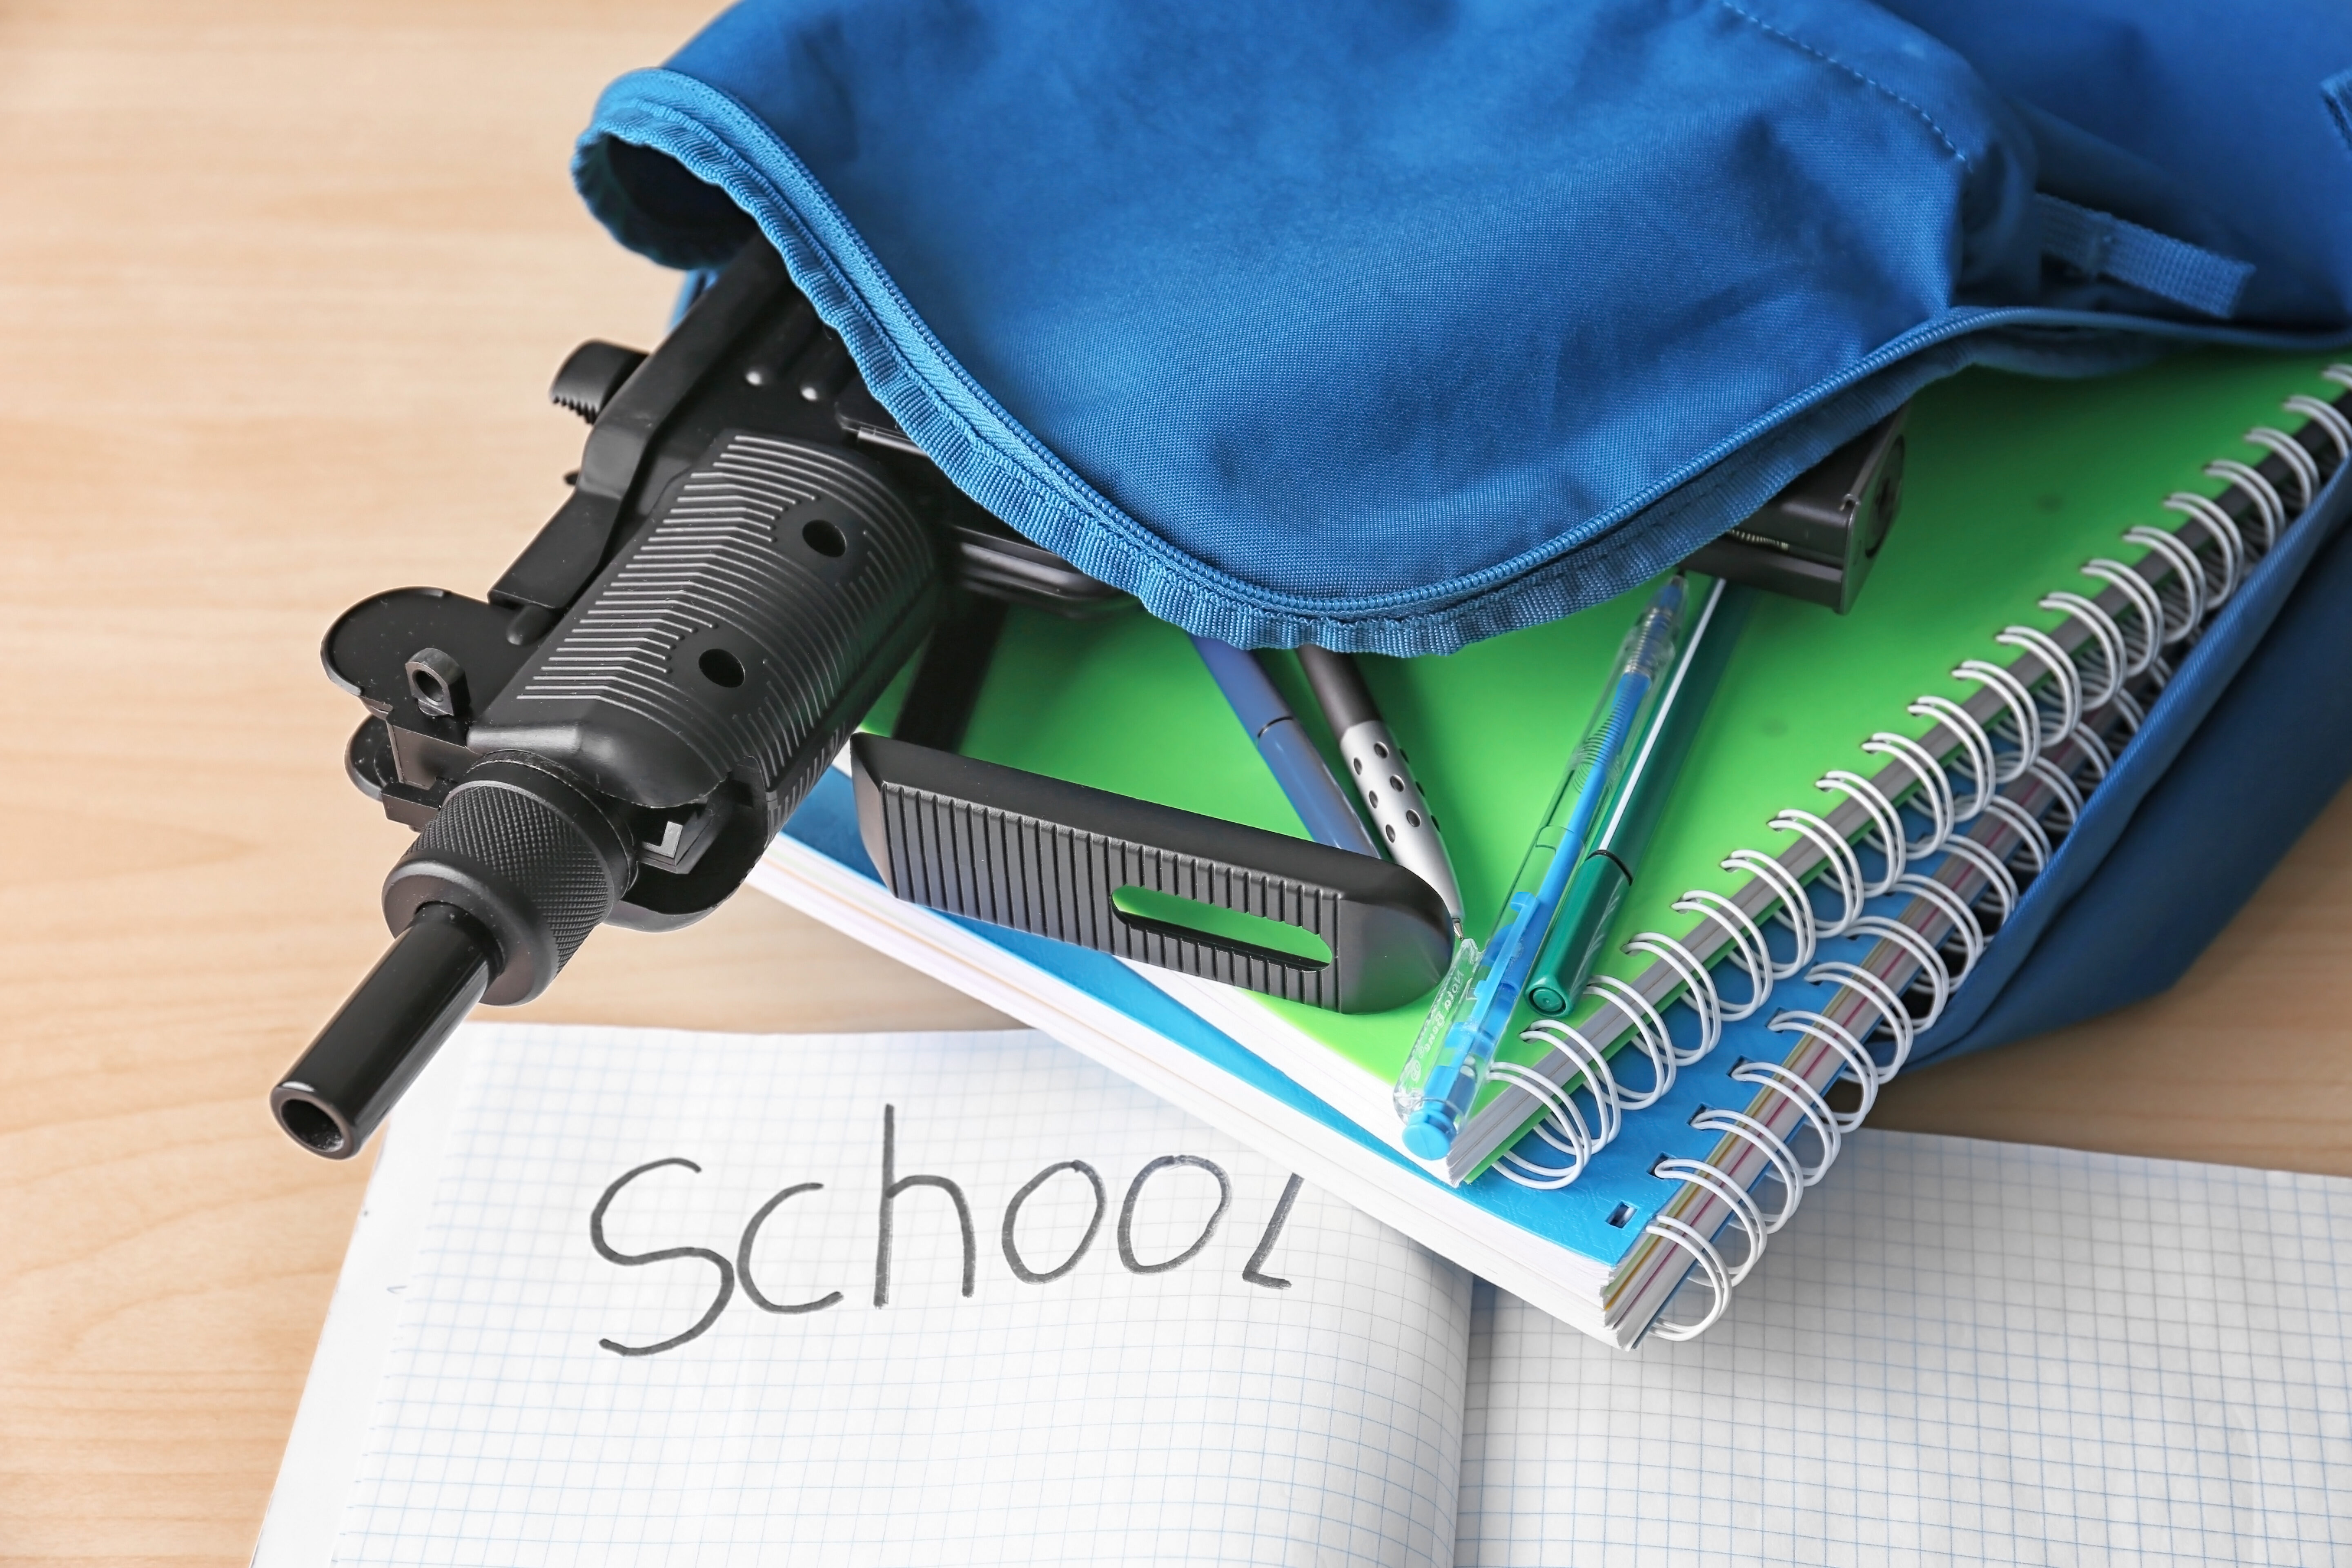 Gun in a bookback for an article about school shooters for successful black parenting